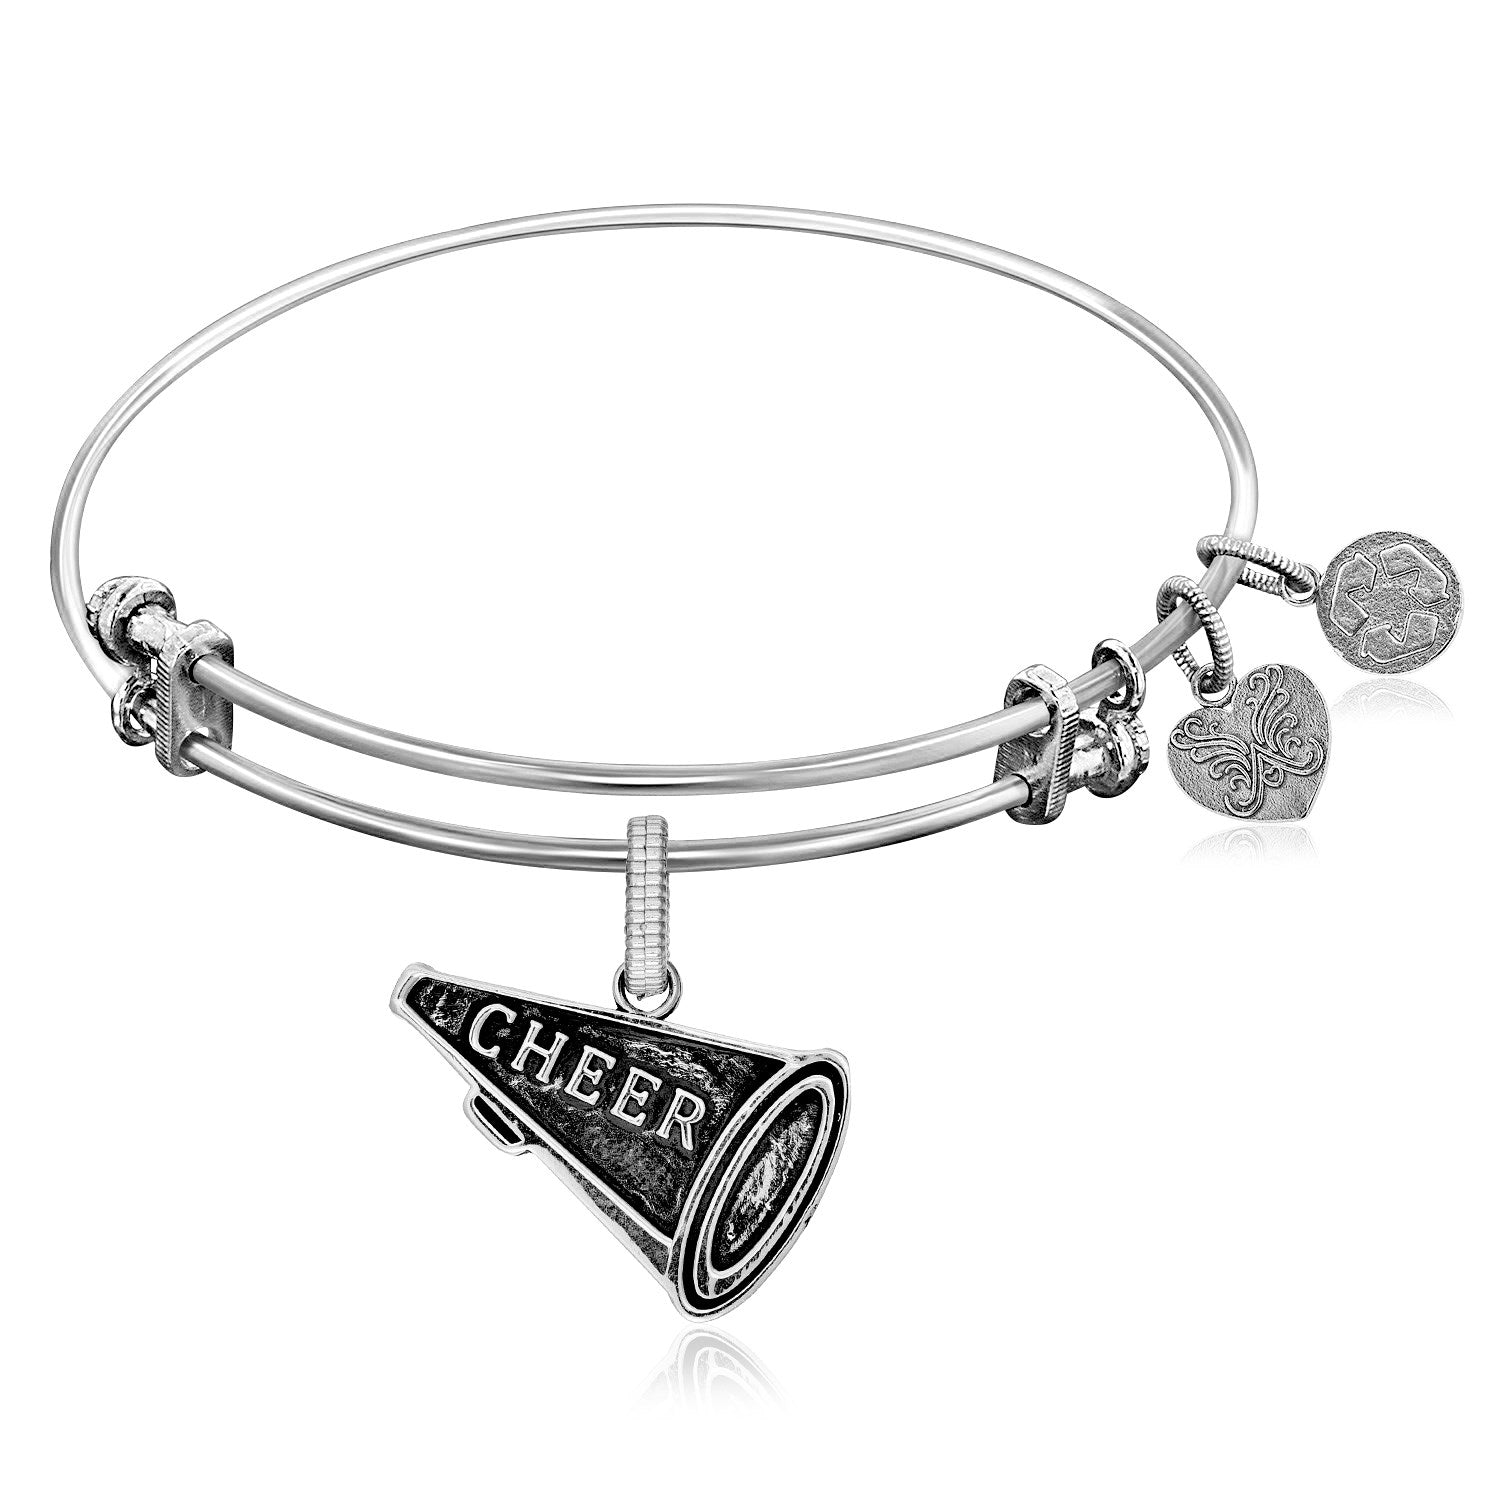 Expandable White Tone Brass Bangle with Cheer Symbol